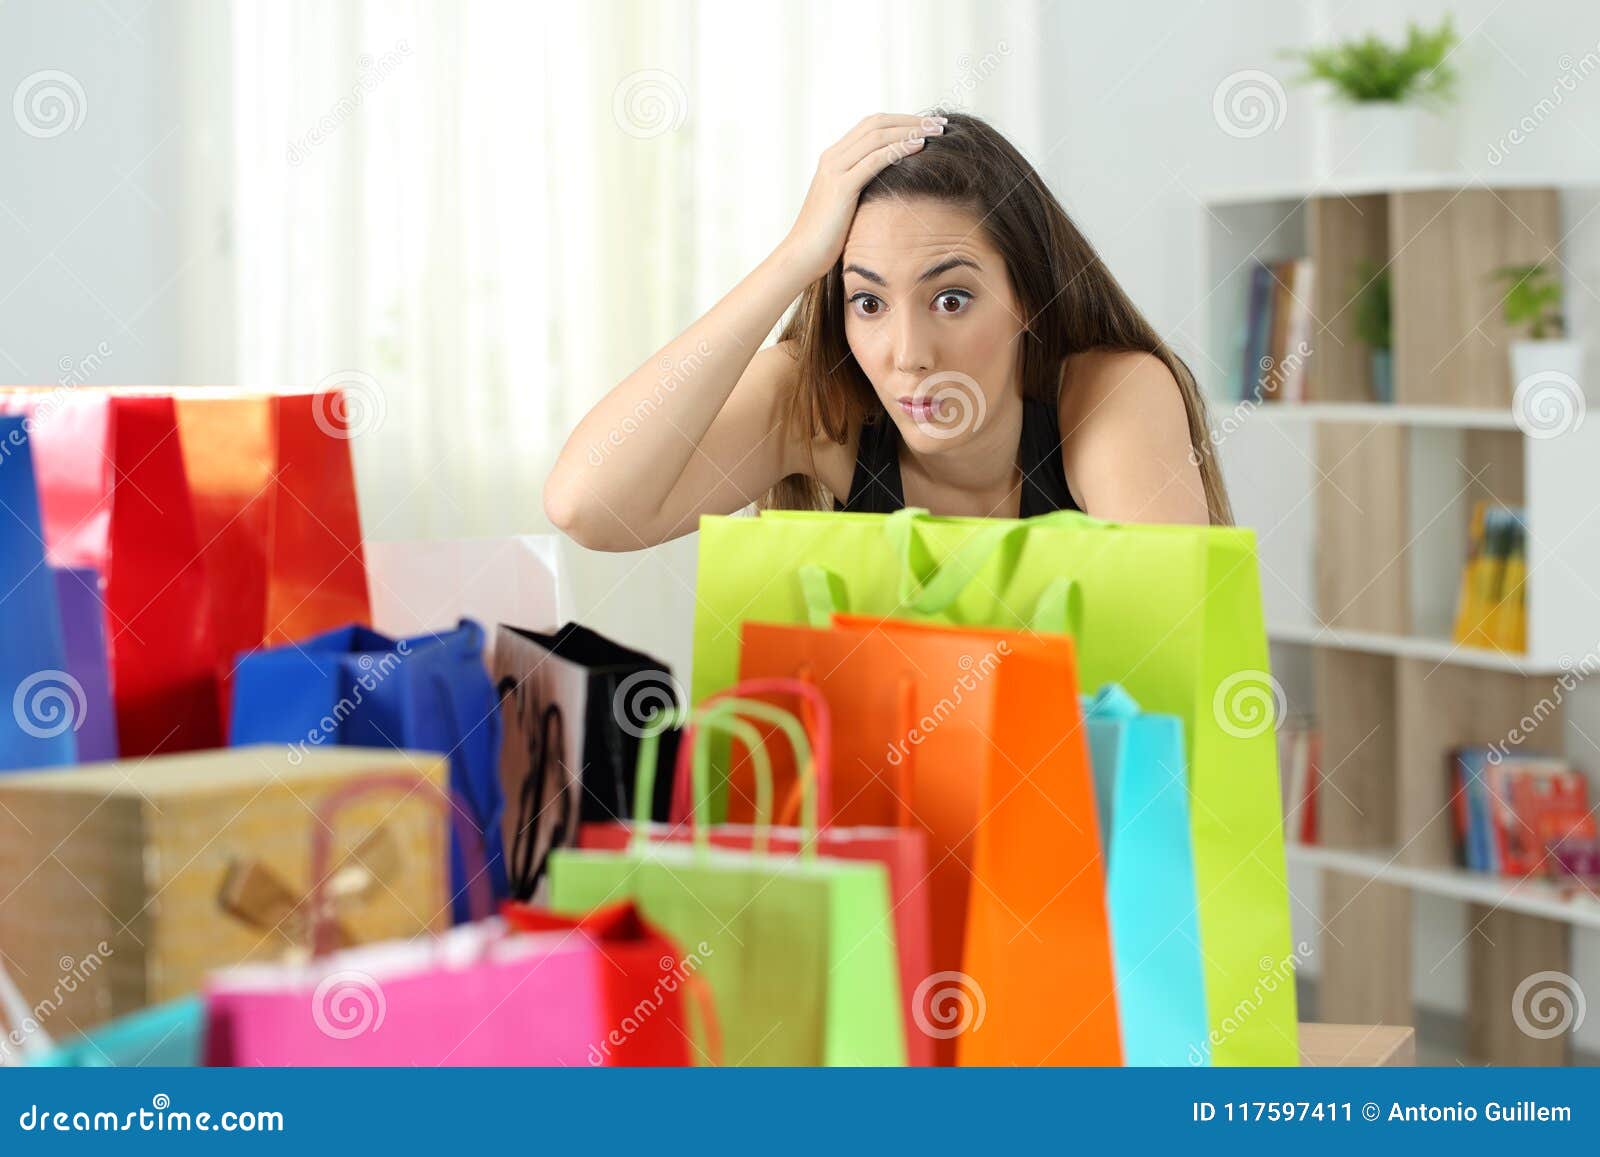 surprised woman looking at multiple purchases